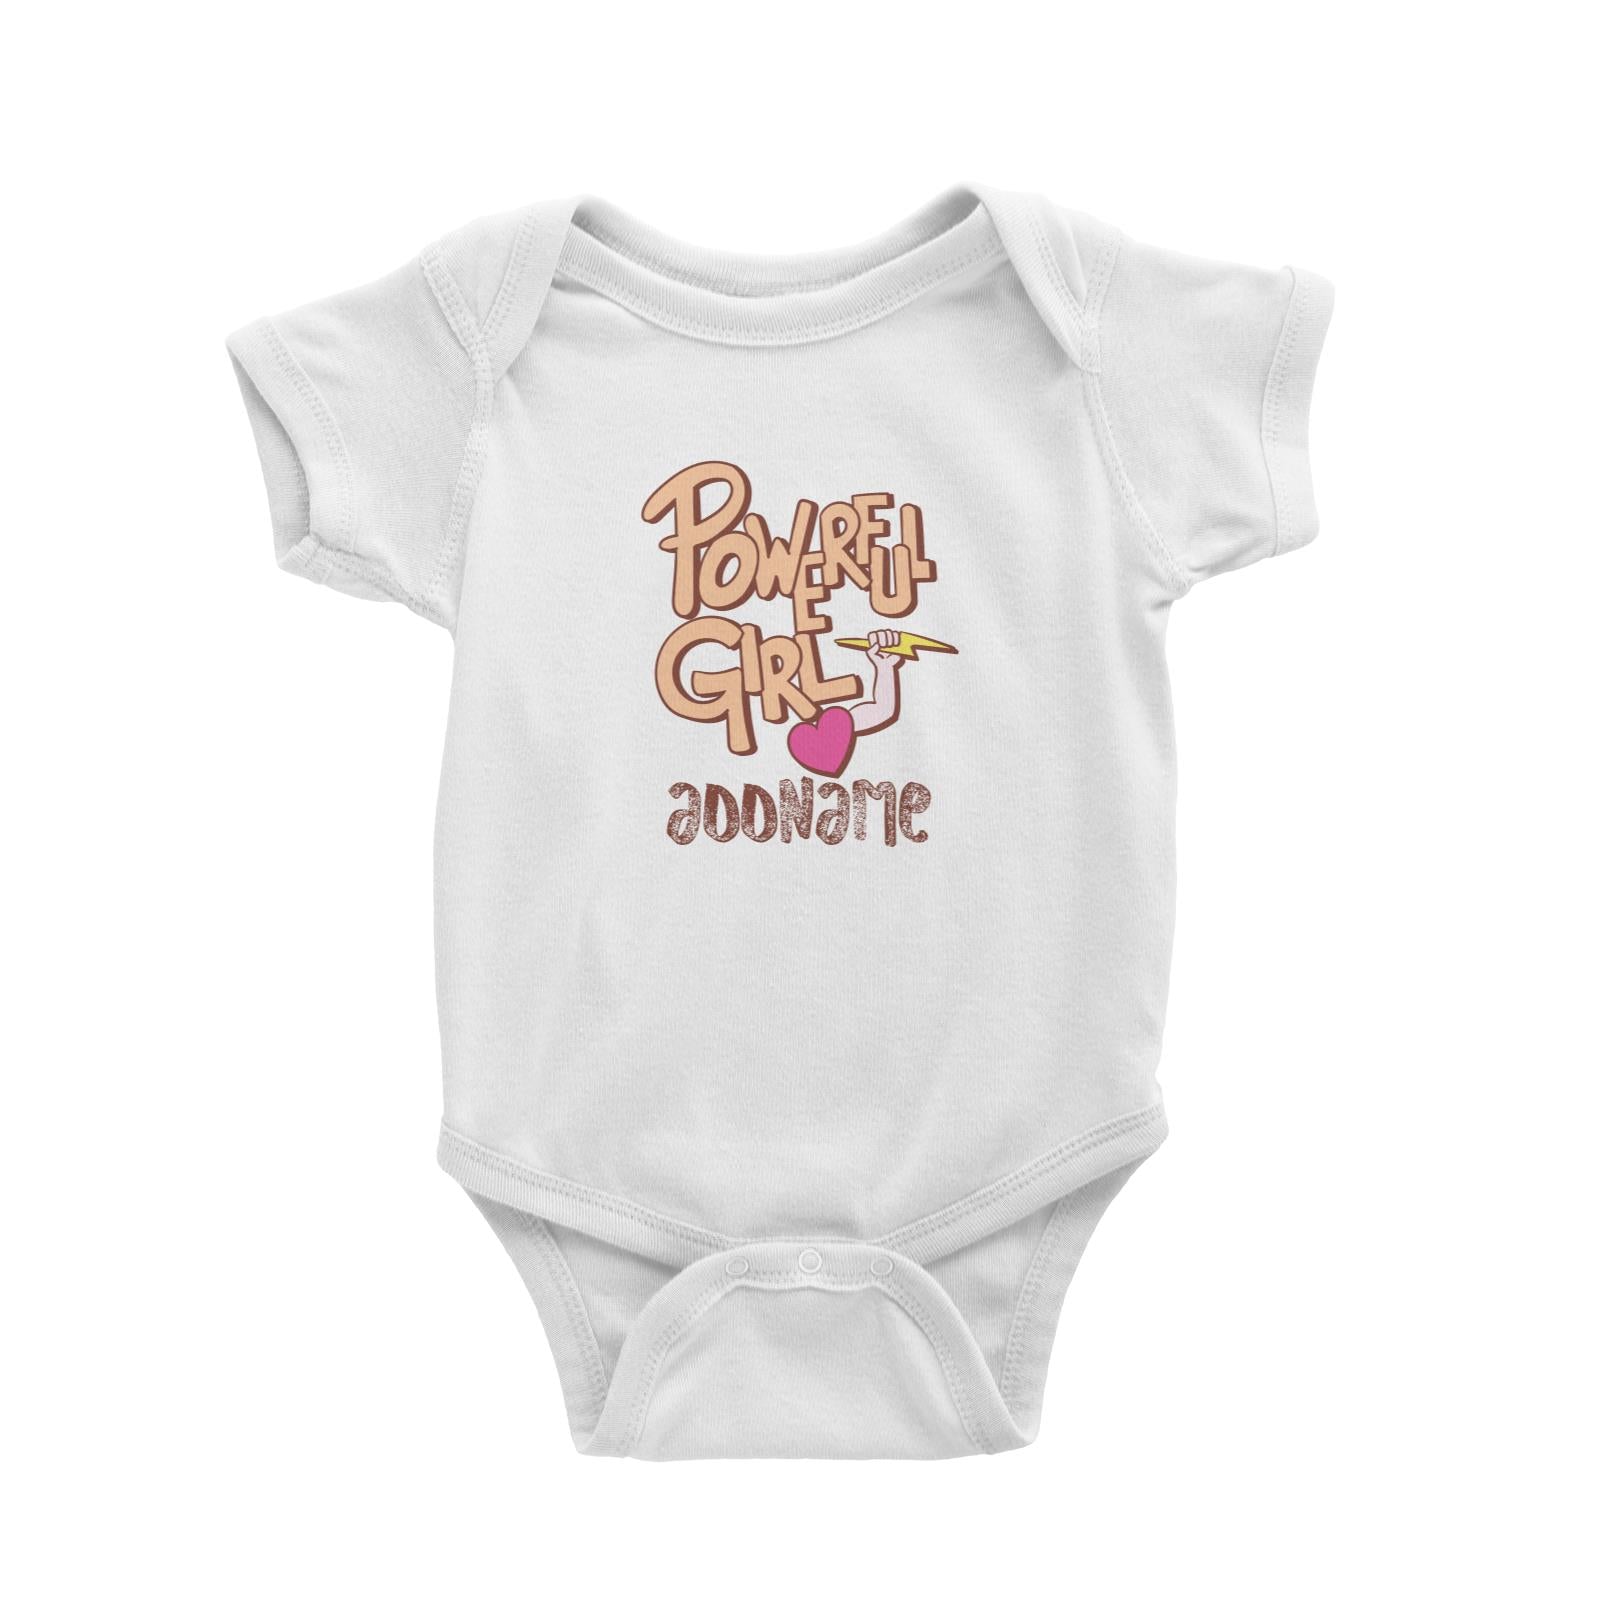 Cool Cute Words Powerful Girl Heart Hold Lightning Addname Baby Romper